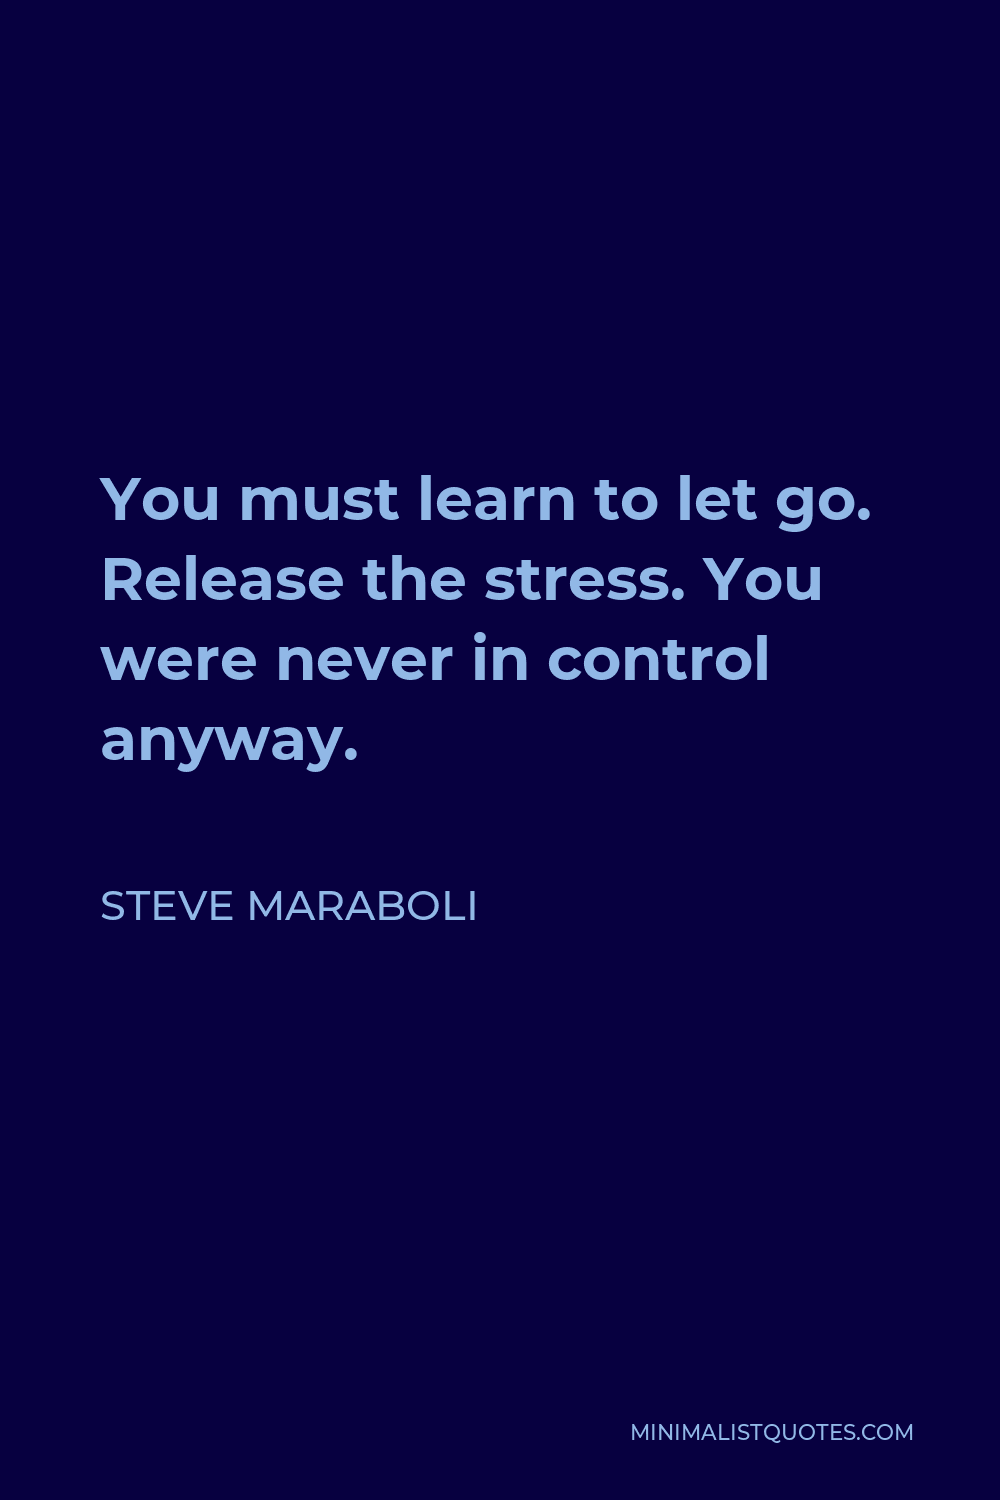 Steve Maraboli Quote - You must learn to let go. Release the stress. You were never in control anyway.